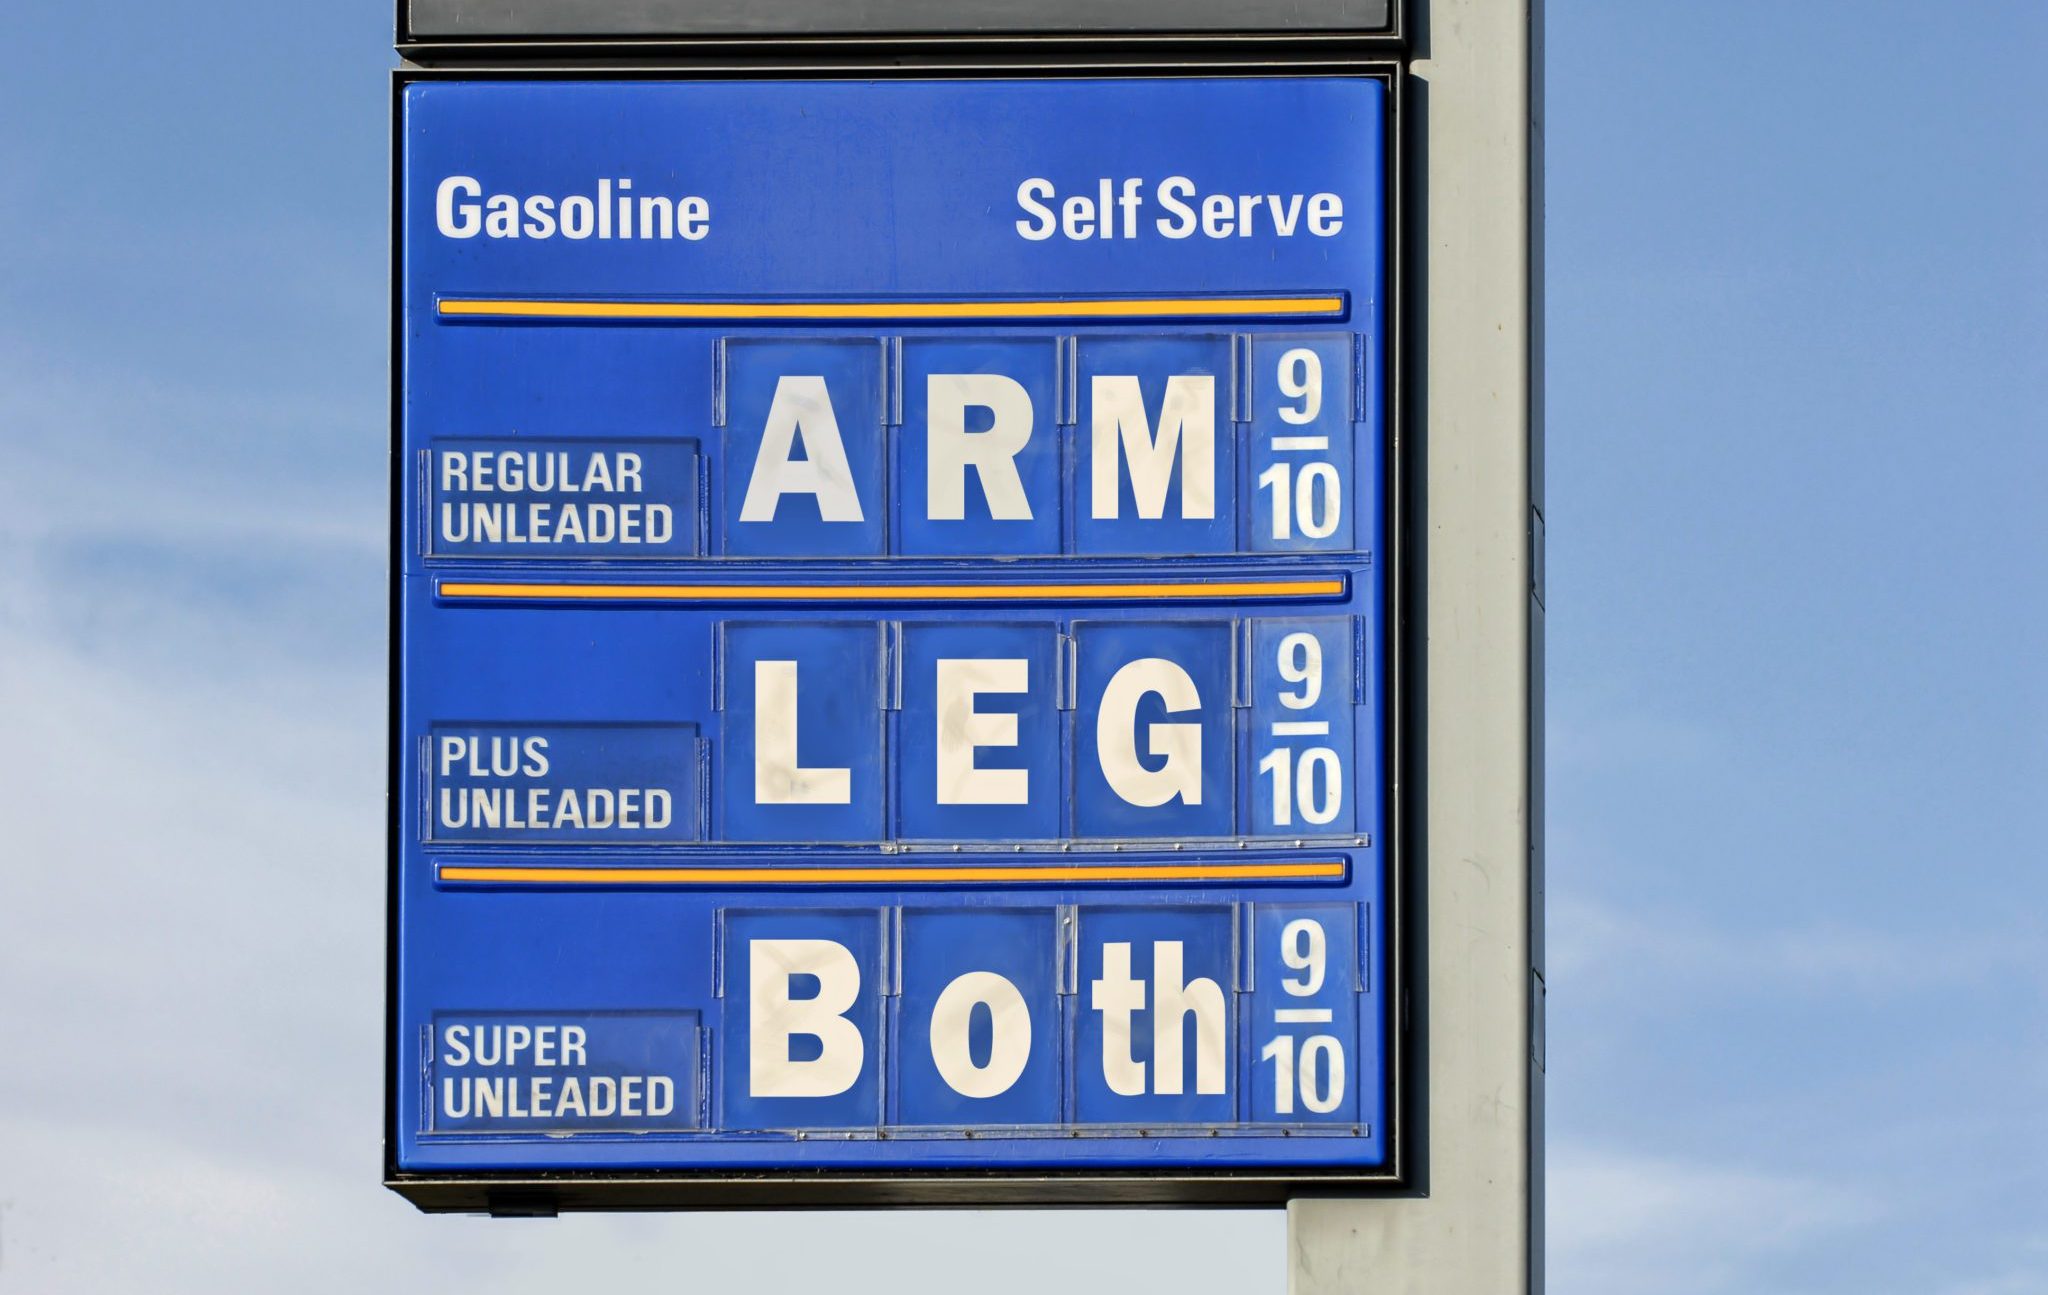 Gasoline,Prices,:,Gas,Price,Sign,With,A,Humorous,Slant.